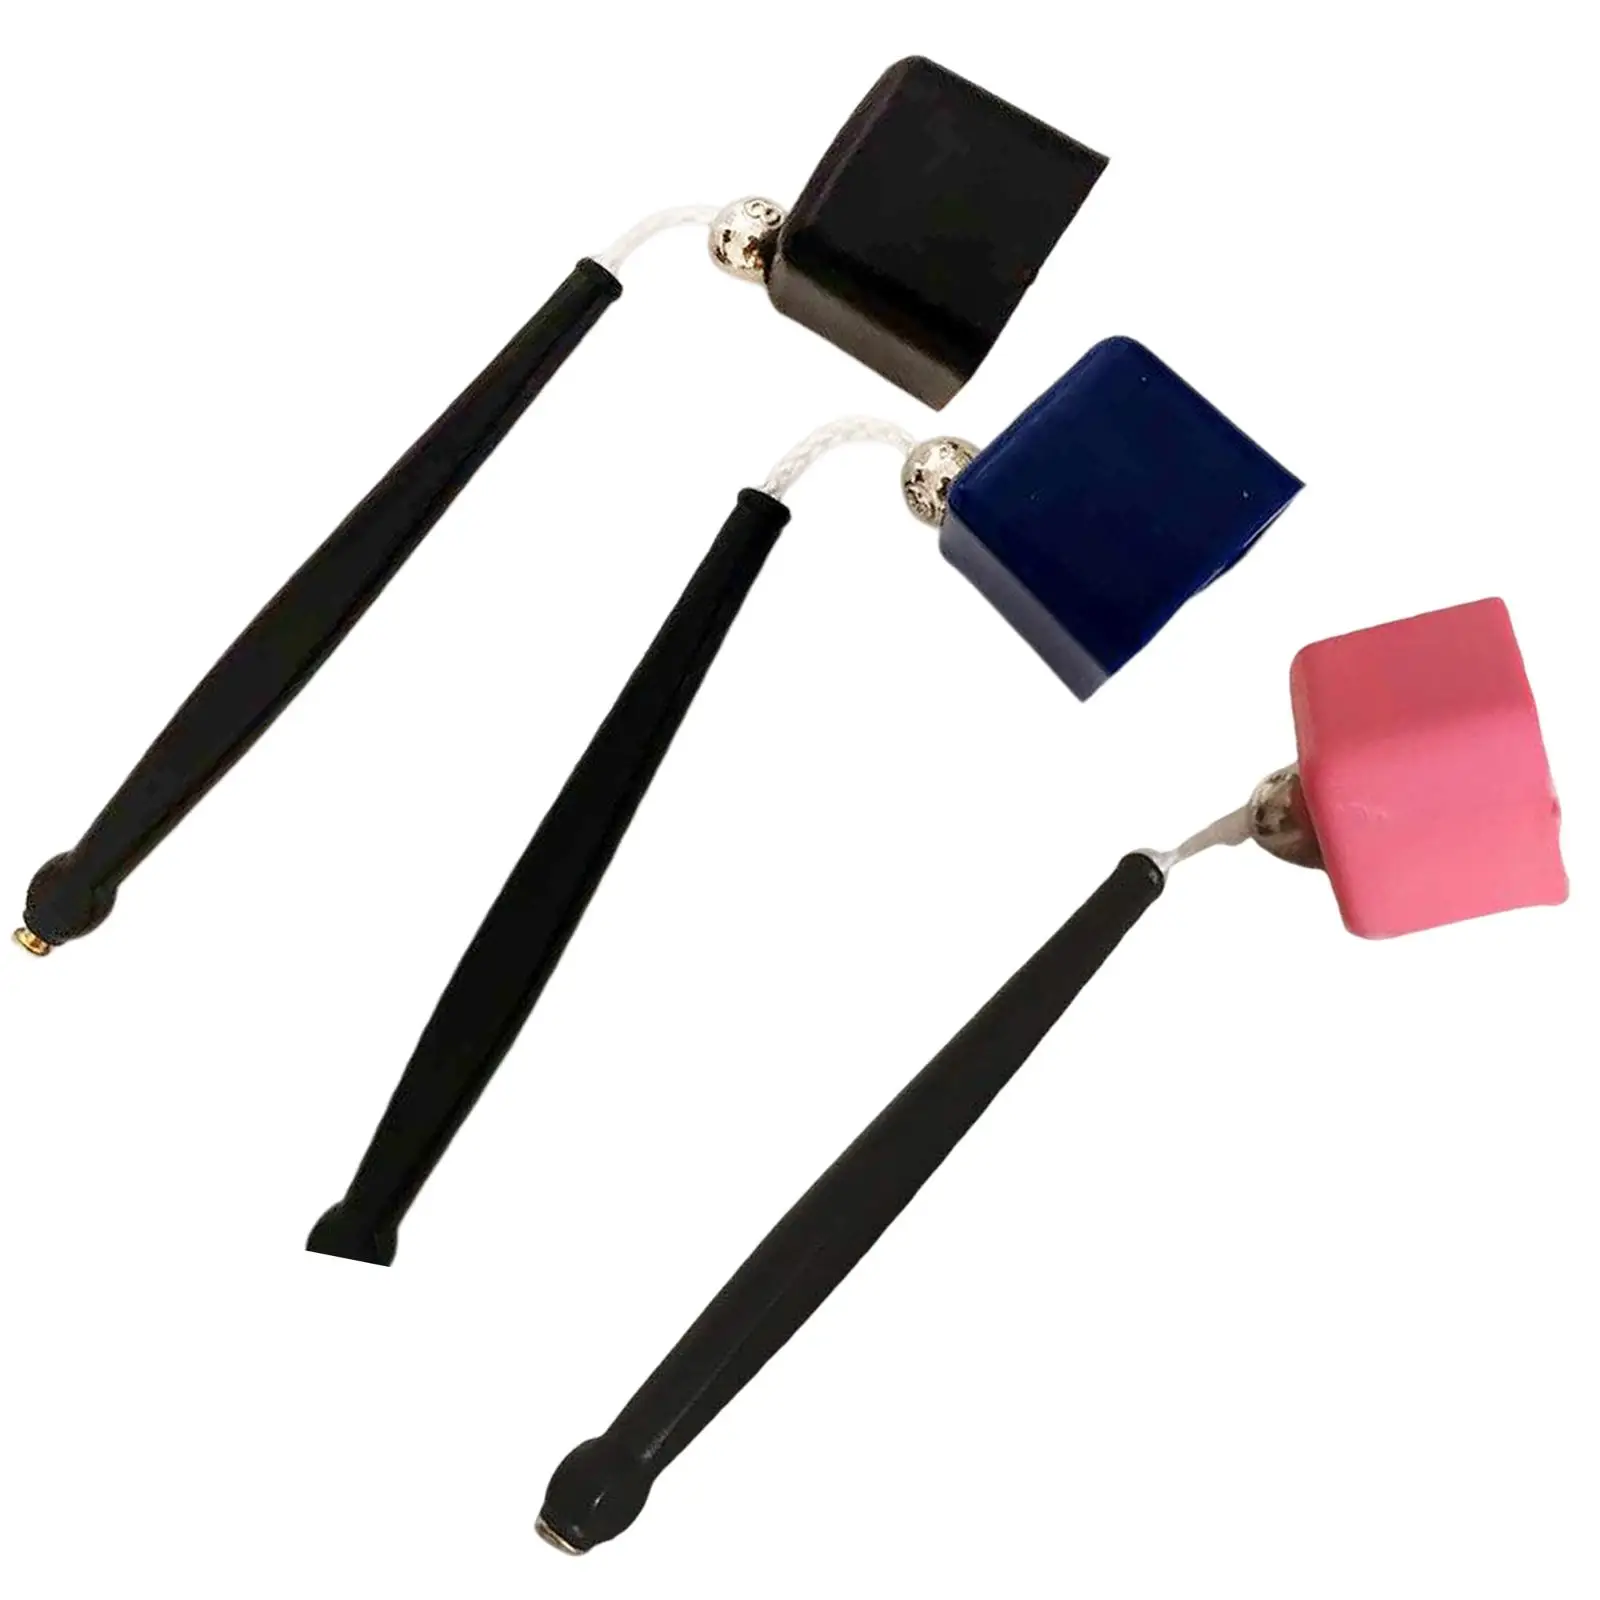 Portable Billiards Pocket Chalkers Holder Easy to Carry Practical Tool Billiard